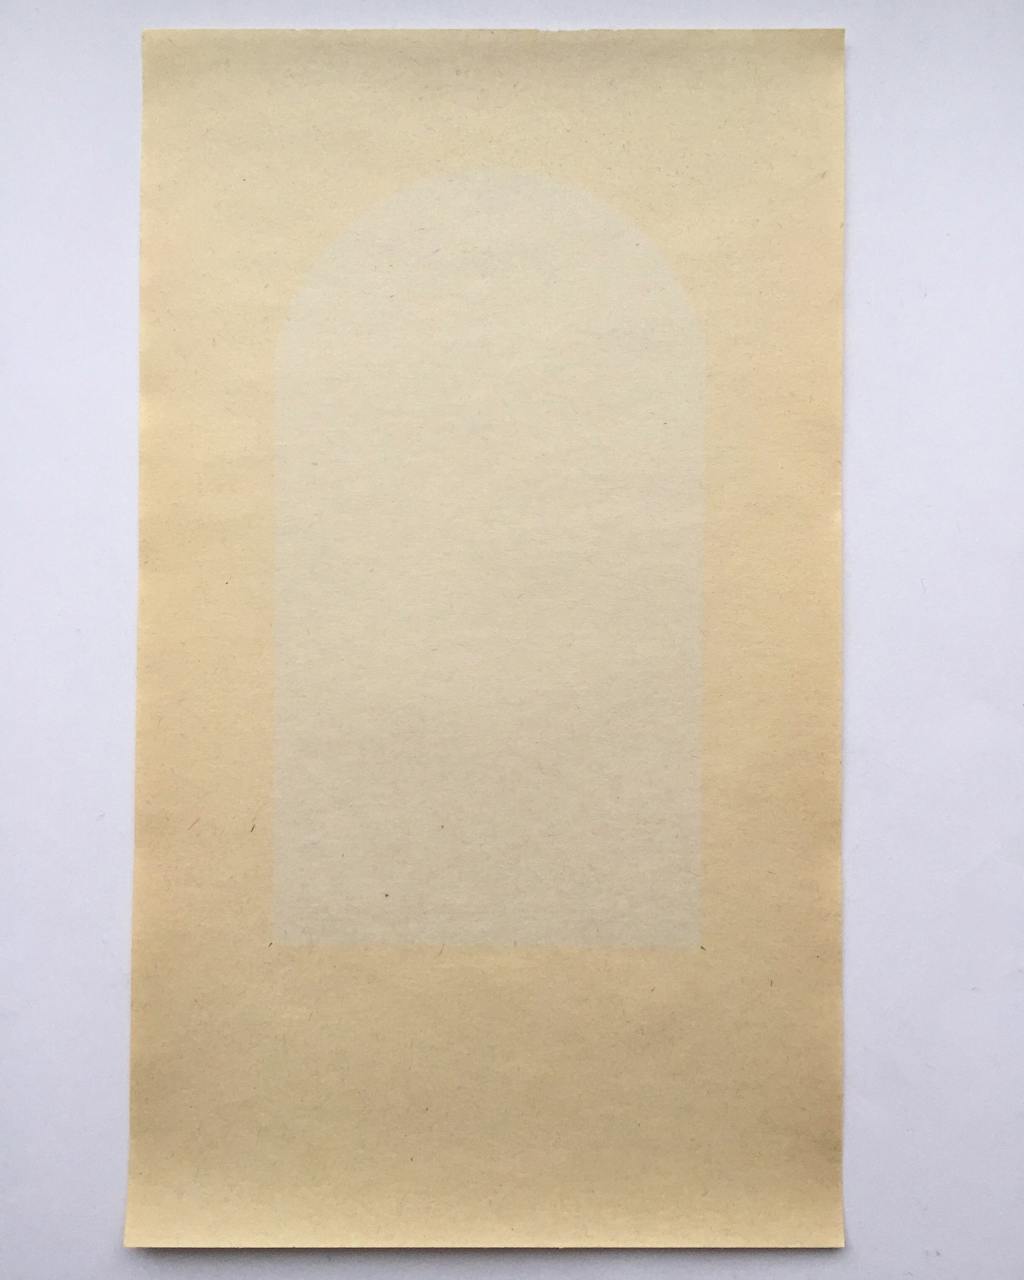 <p style="font-size:10px">Charbel-joseph H. Boutros, The last week of 2020, 2021, recycled paper, sun, 20 x 11.5 cm</p>

<p style="font-size:10px">The sun of the last week of 2020 on a recycled paper bought at Hema, Amsterdam.</p> - © Image courtesy of the artist and Grey Noise, Dubai., Paris Internationale